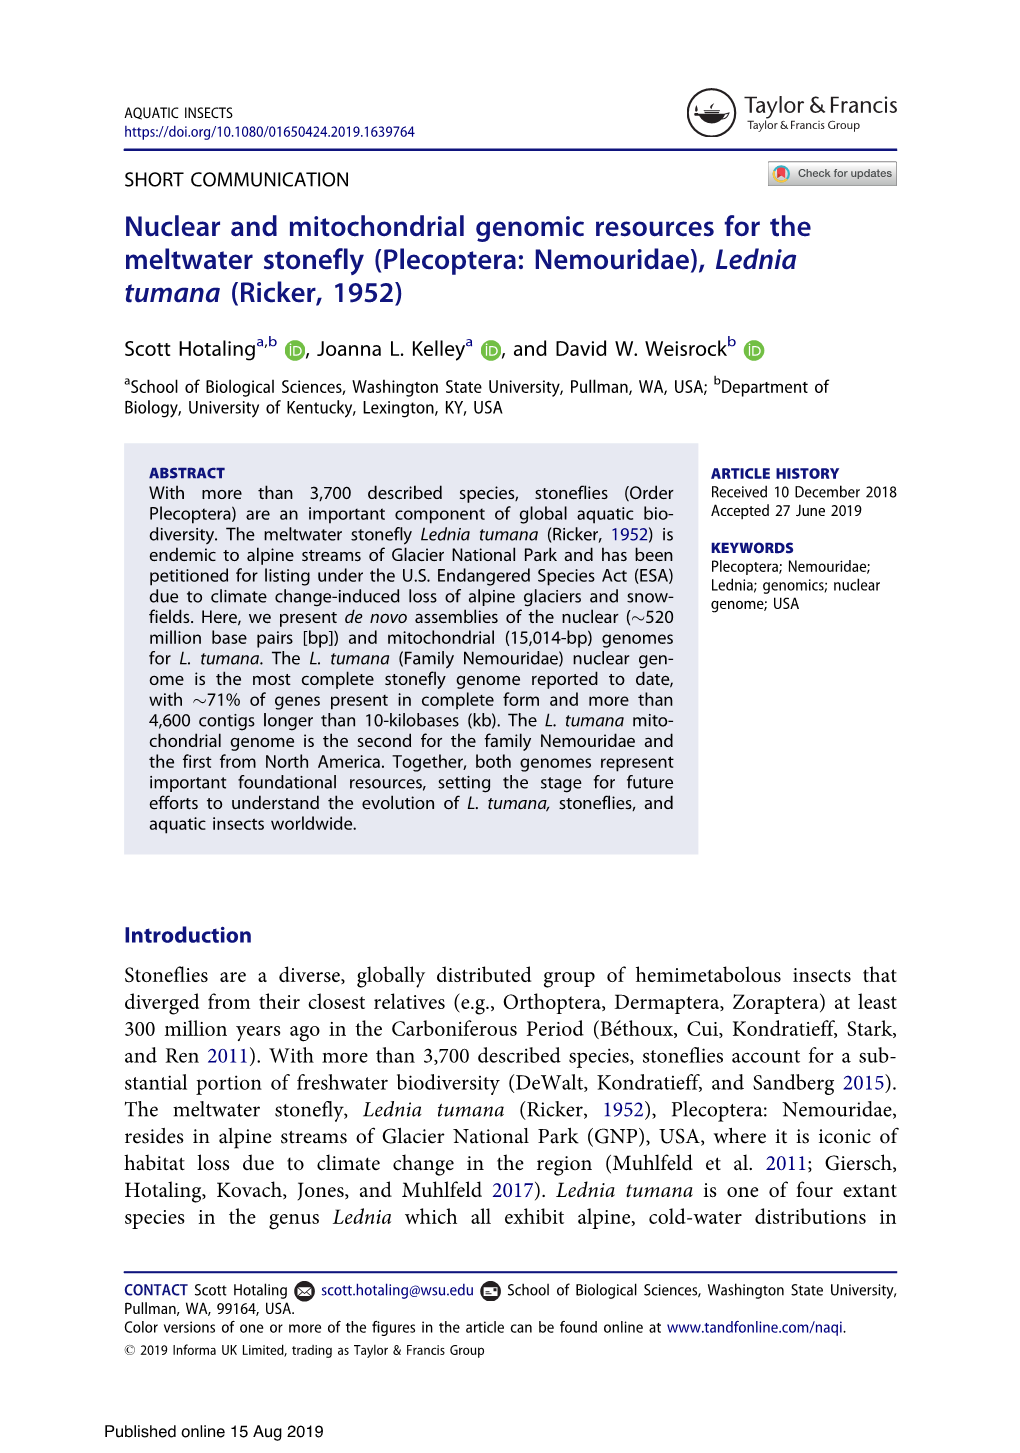 Nuclear and Mitochondrial Genomic Resources for the Meltwater Stonefly (Plecoptera: Nemouridae), Lednia Tumana (Ricker, 1952)